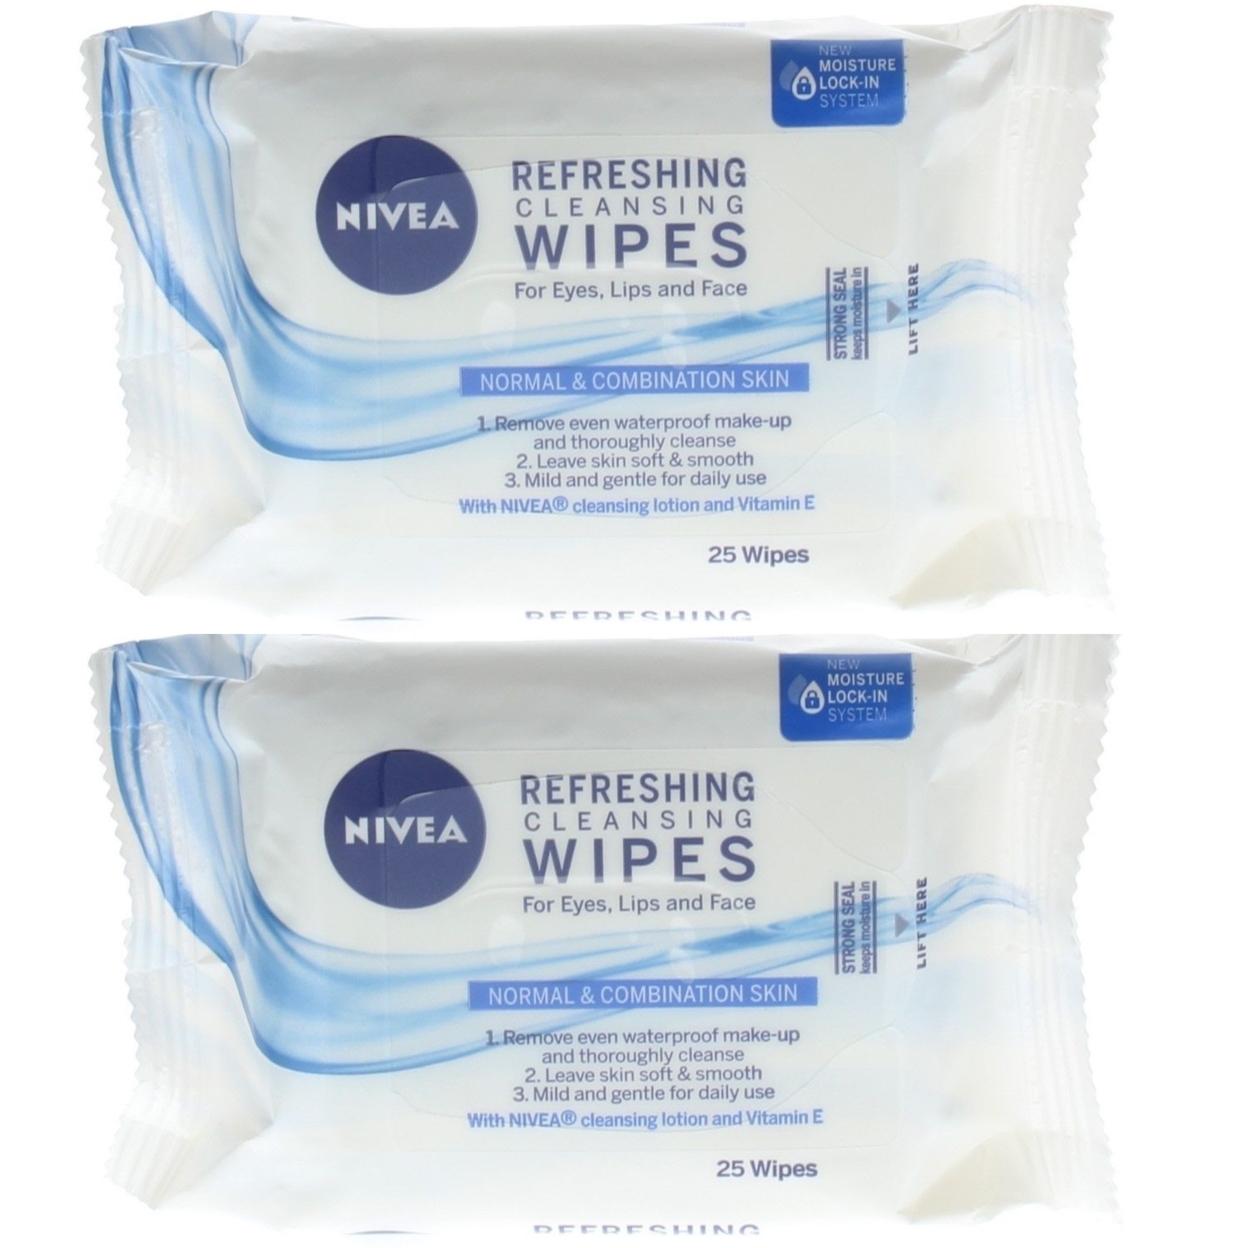 Nivea 3-In-1 Refreshing Cleansing Wipes Face Cleansing (2 Packs Of 25 Wipes- Total 50 Wipes)